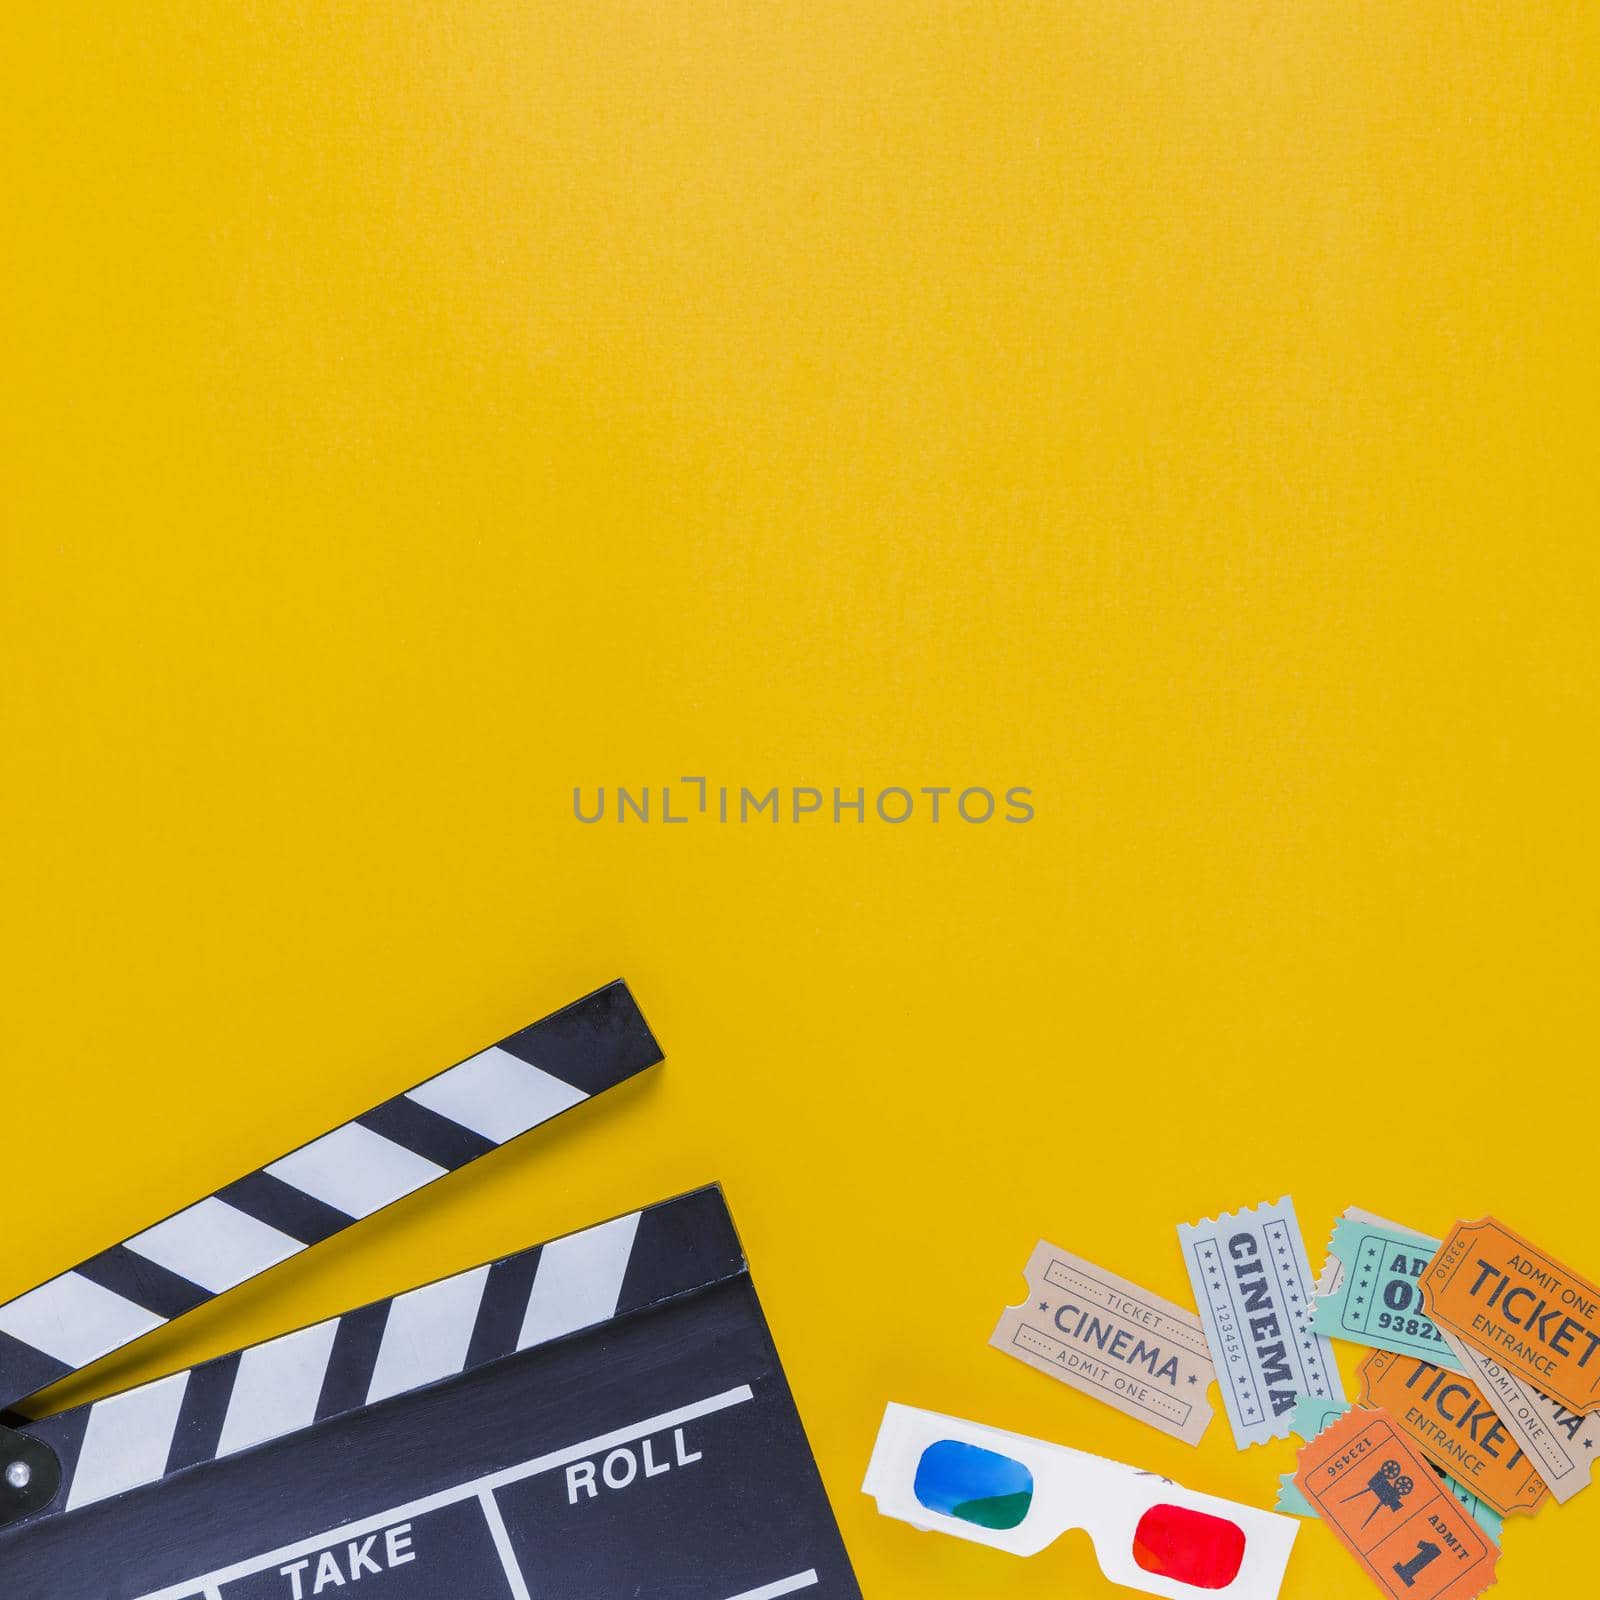 clapperboard with cinema tickets 3d glasses by Zahard